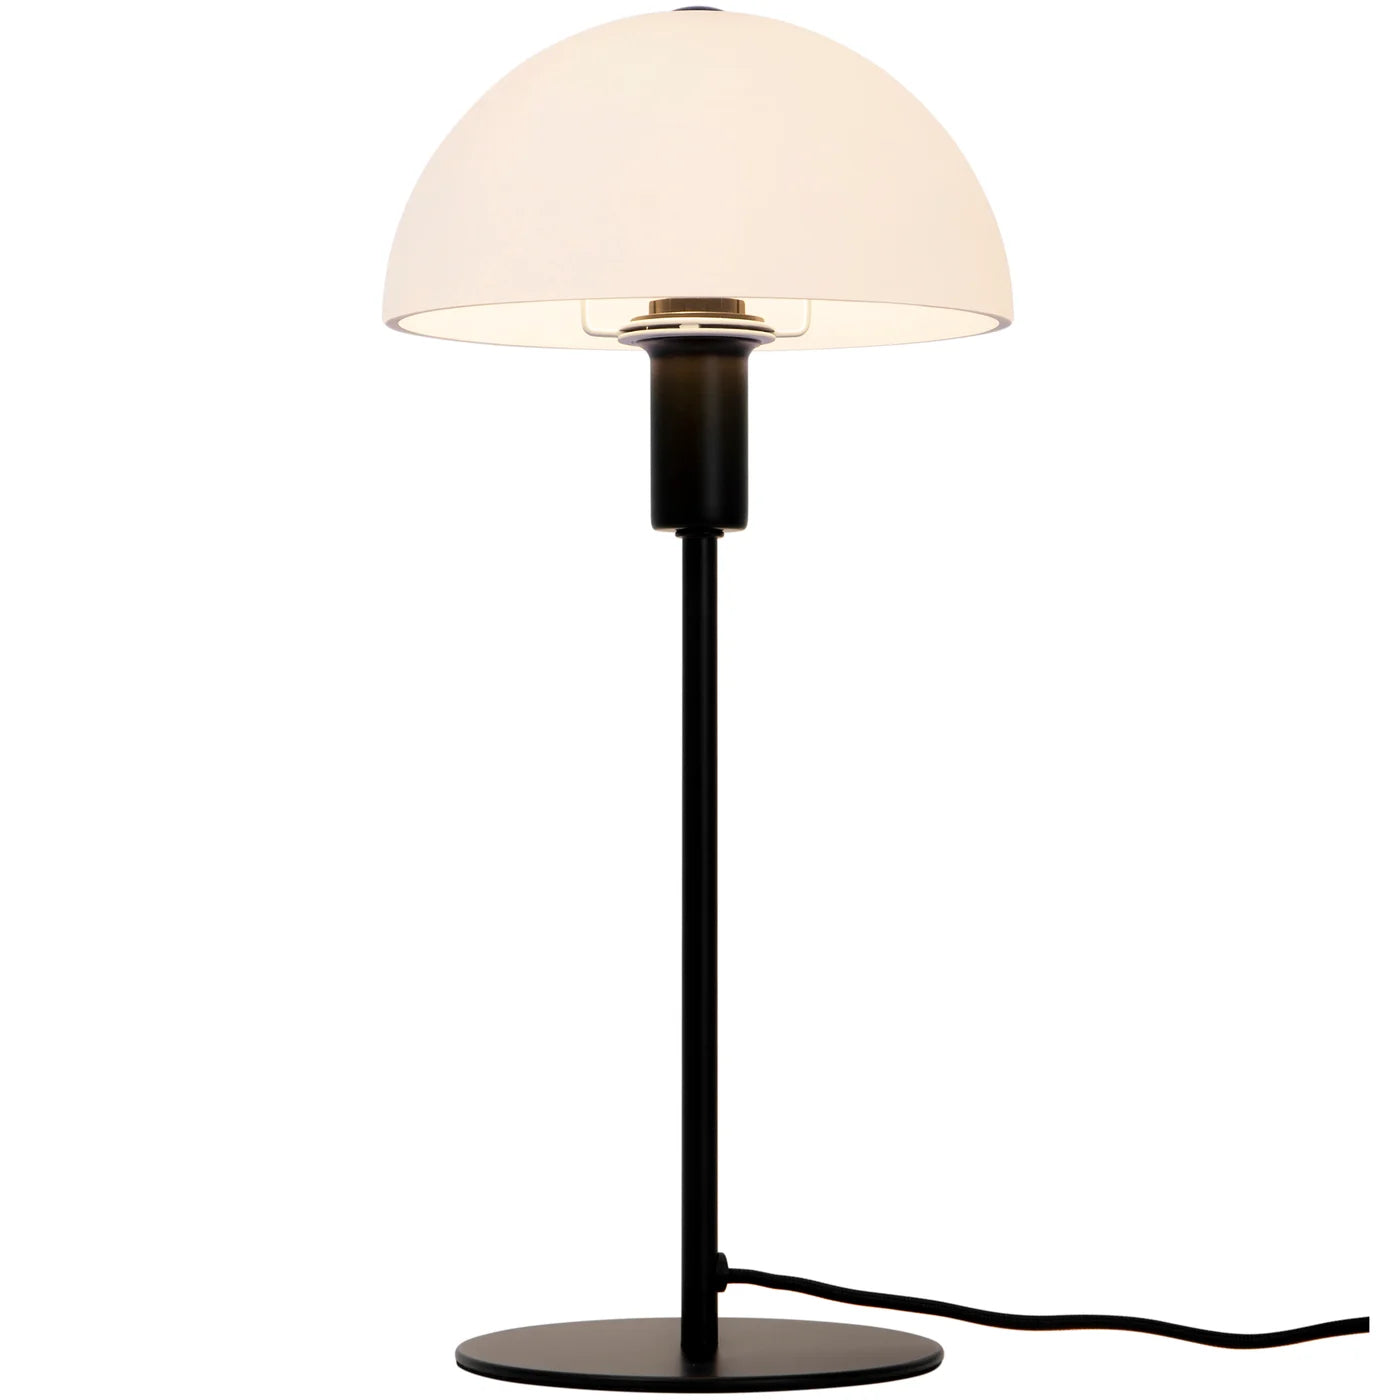 Table lamp ELLEN black with glass diffuser